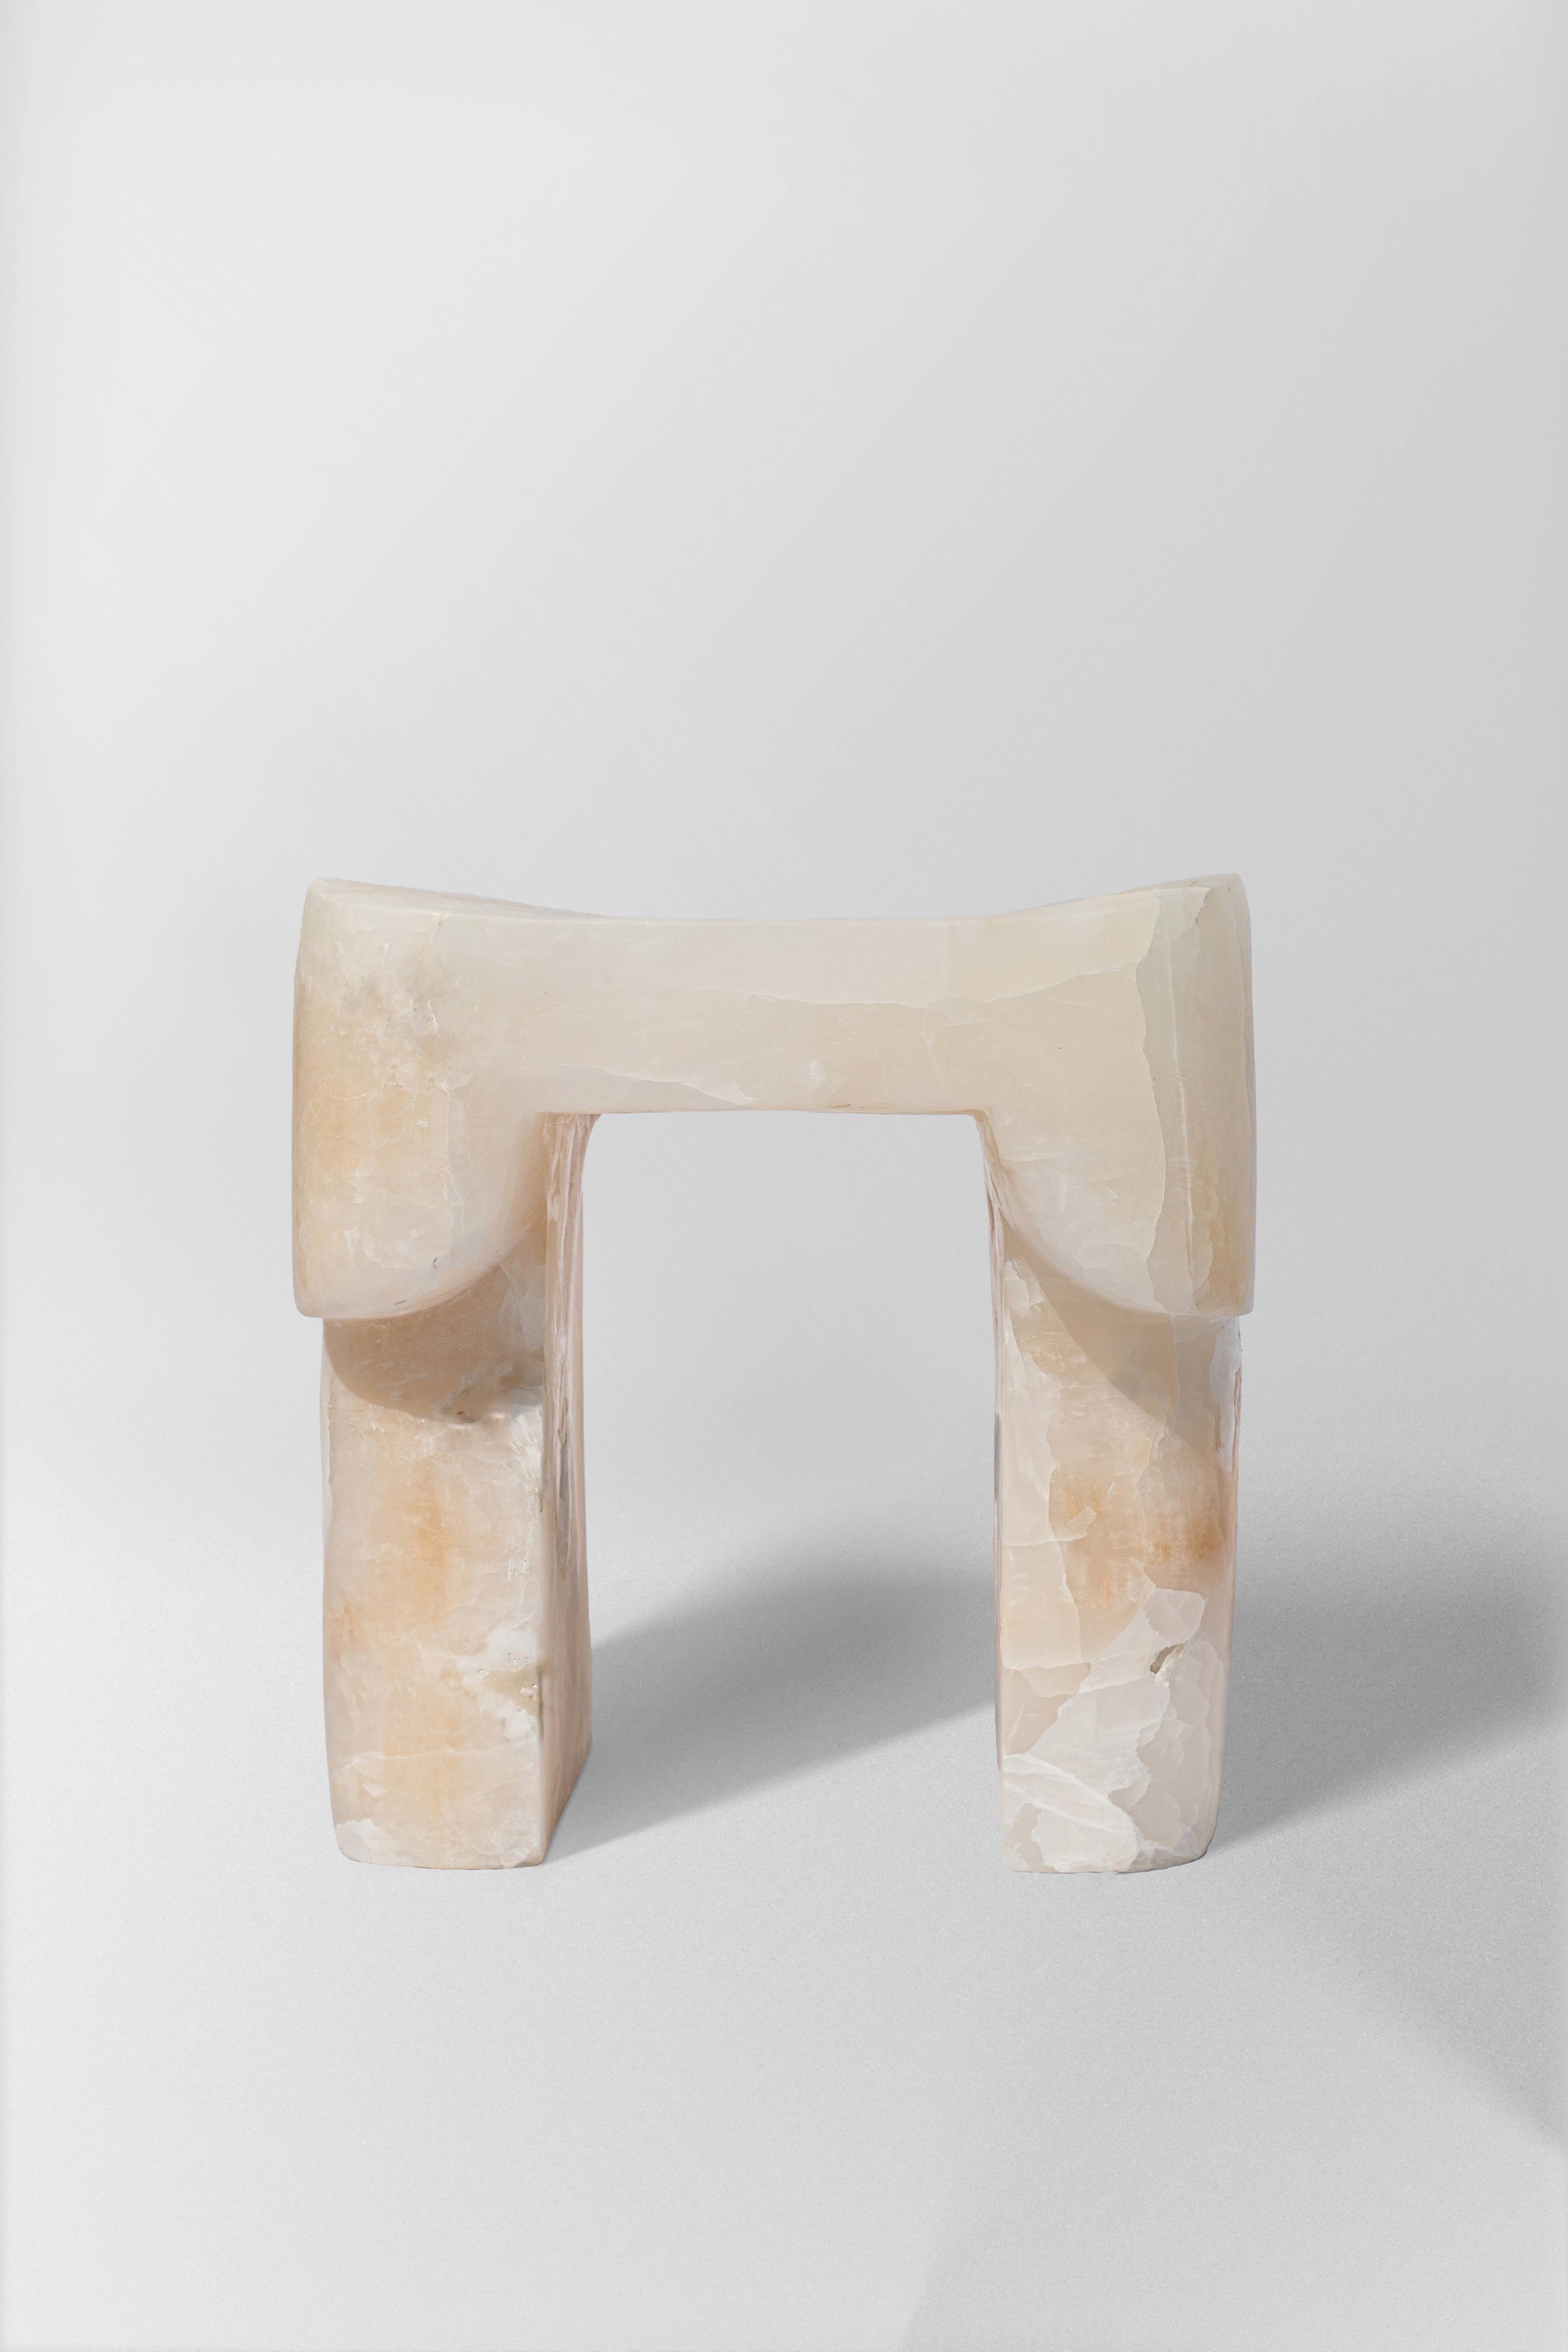 White Onyx Stool by Henry Wilson
Limited Edition Of 8 Pieces
Dimensions: D 67,5 x W 61,5 x H 62,5 cm.
Materials: White onyx.

Henry Wilson's work combines a rational, democratic utility with an element of sculptural expression. There is a clear form